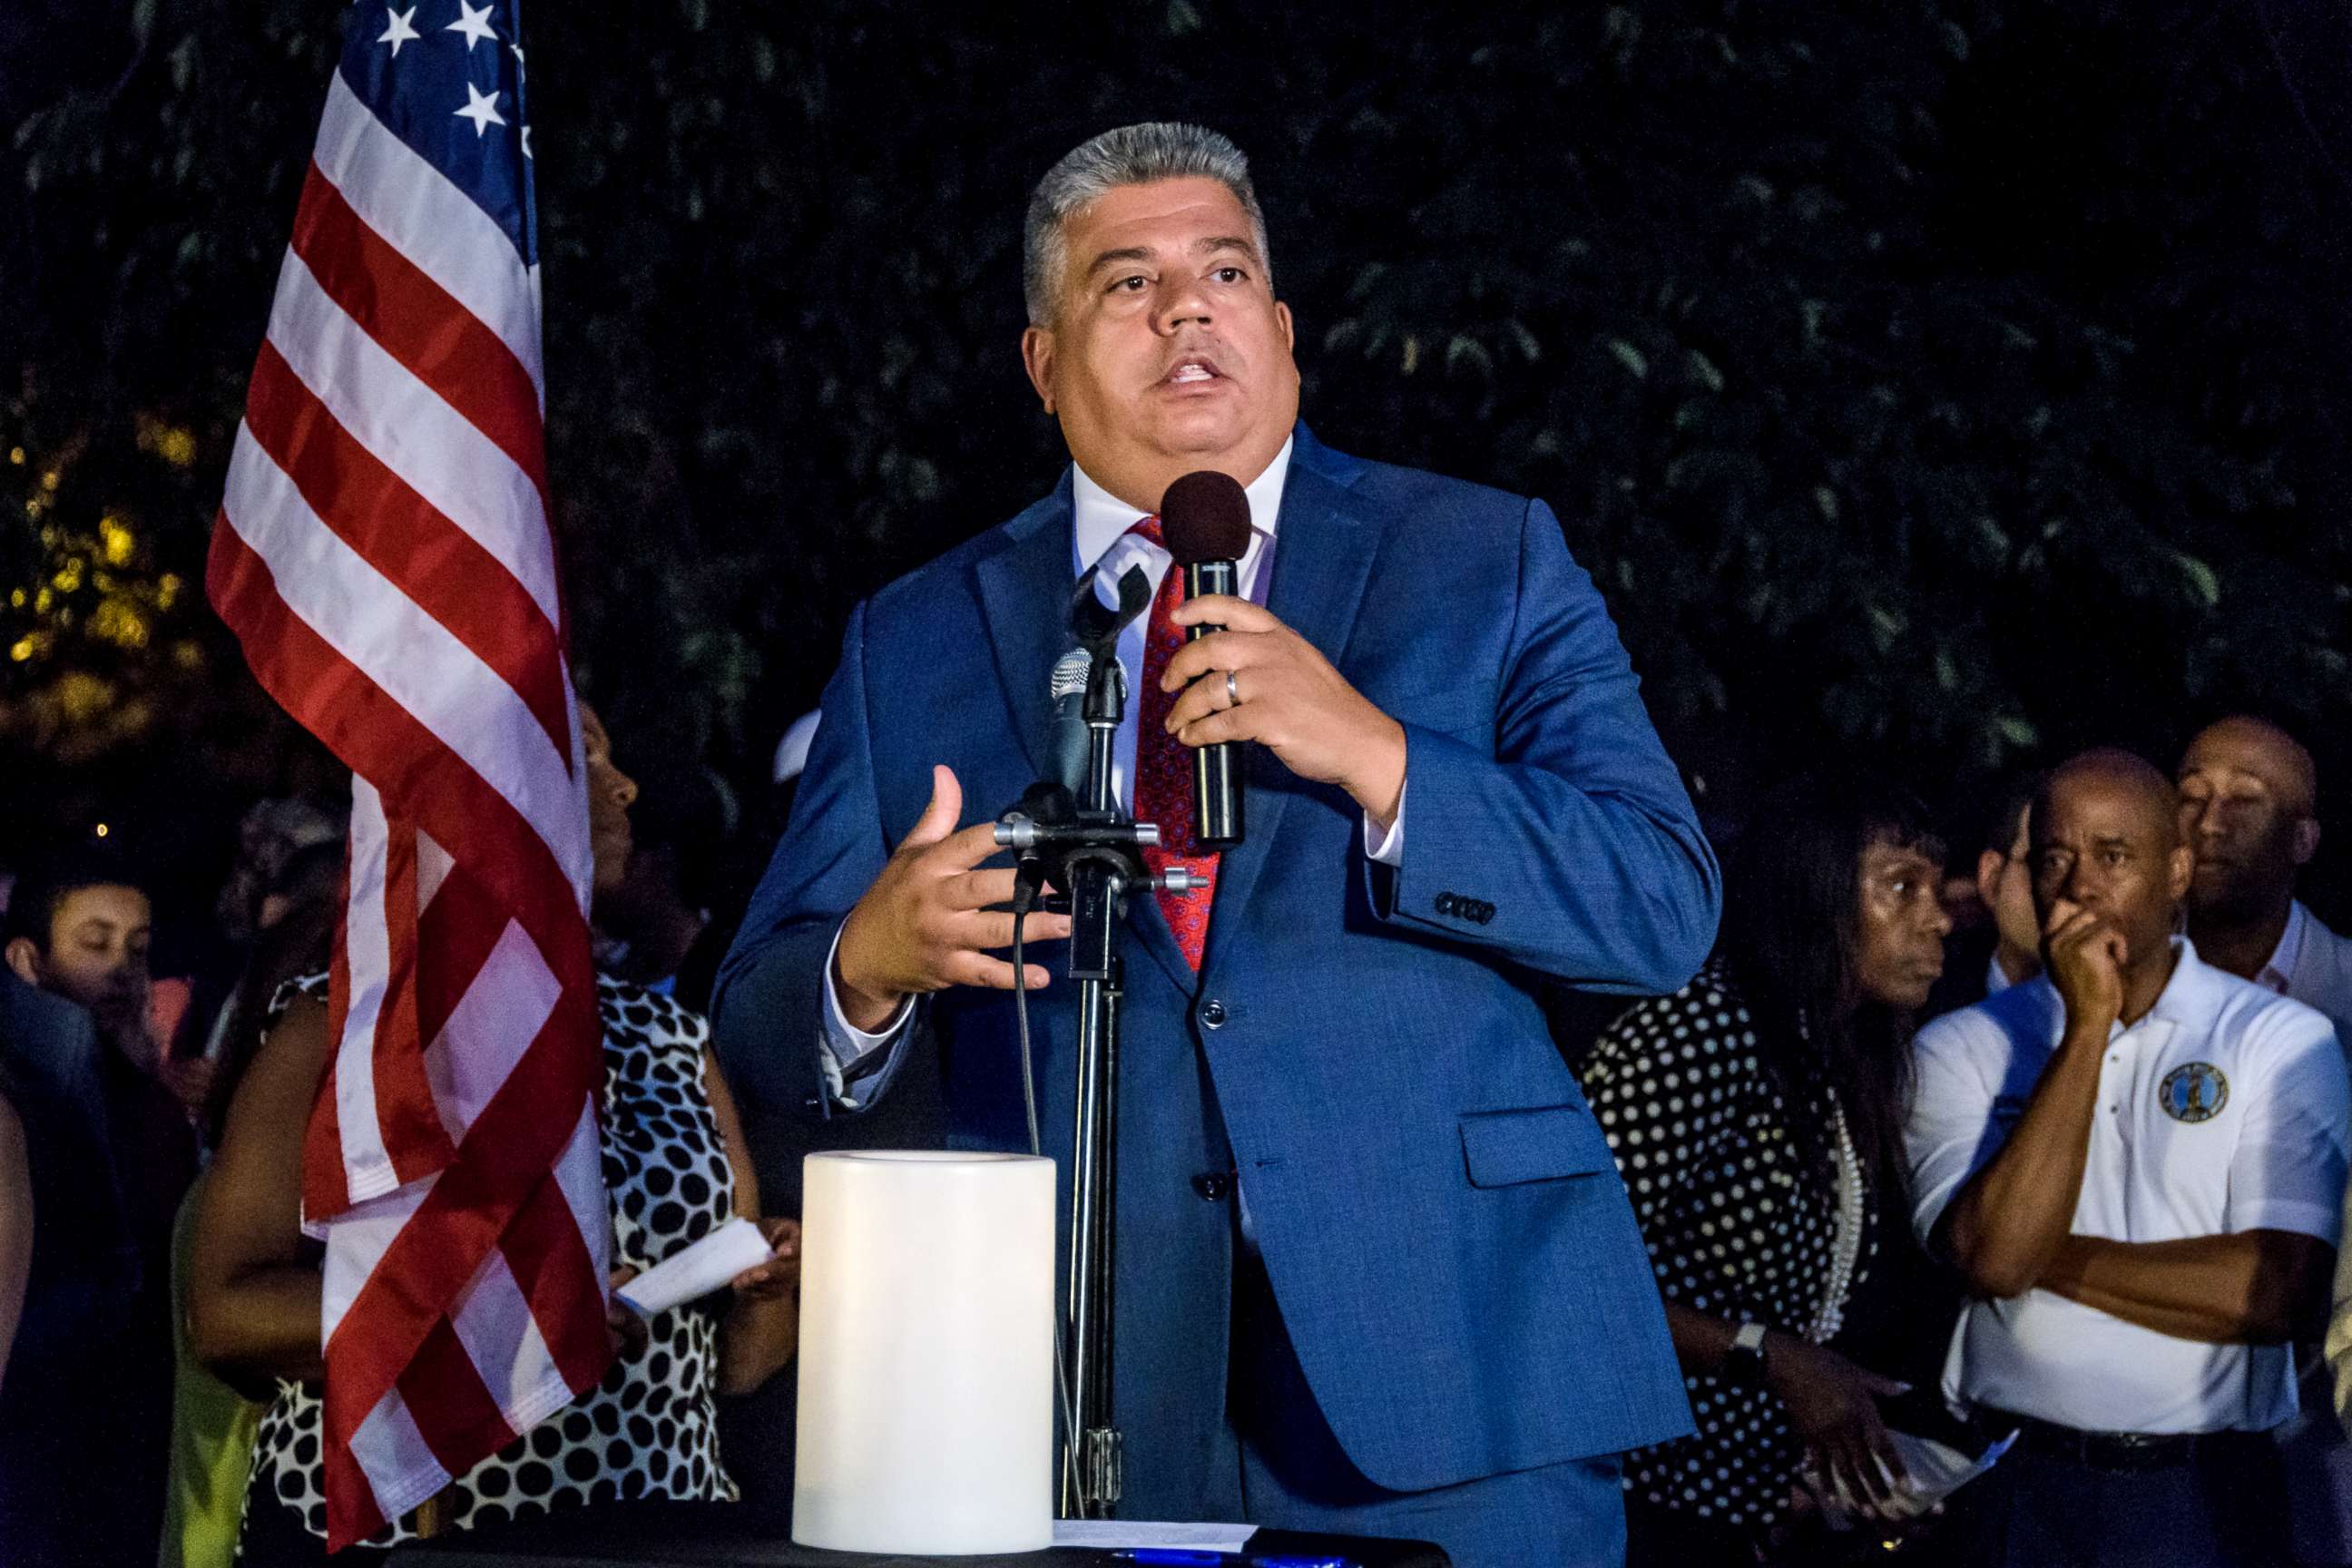 PHOTO: Brooklyn District Attorney Eric Gonzalez and other advocates gather for a candlelight vigil in Prospect Park to mourn the lives lost during recent mass shootings in Brownsville, Dayton, El Paso, and Gilroy, Aug. 5, 2019, in Brooklyn, New York.